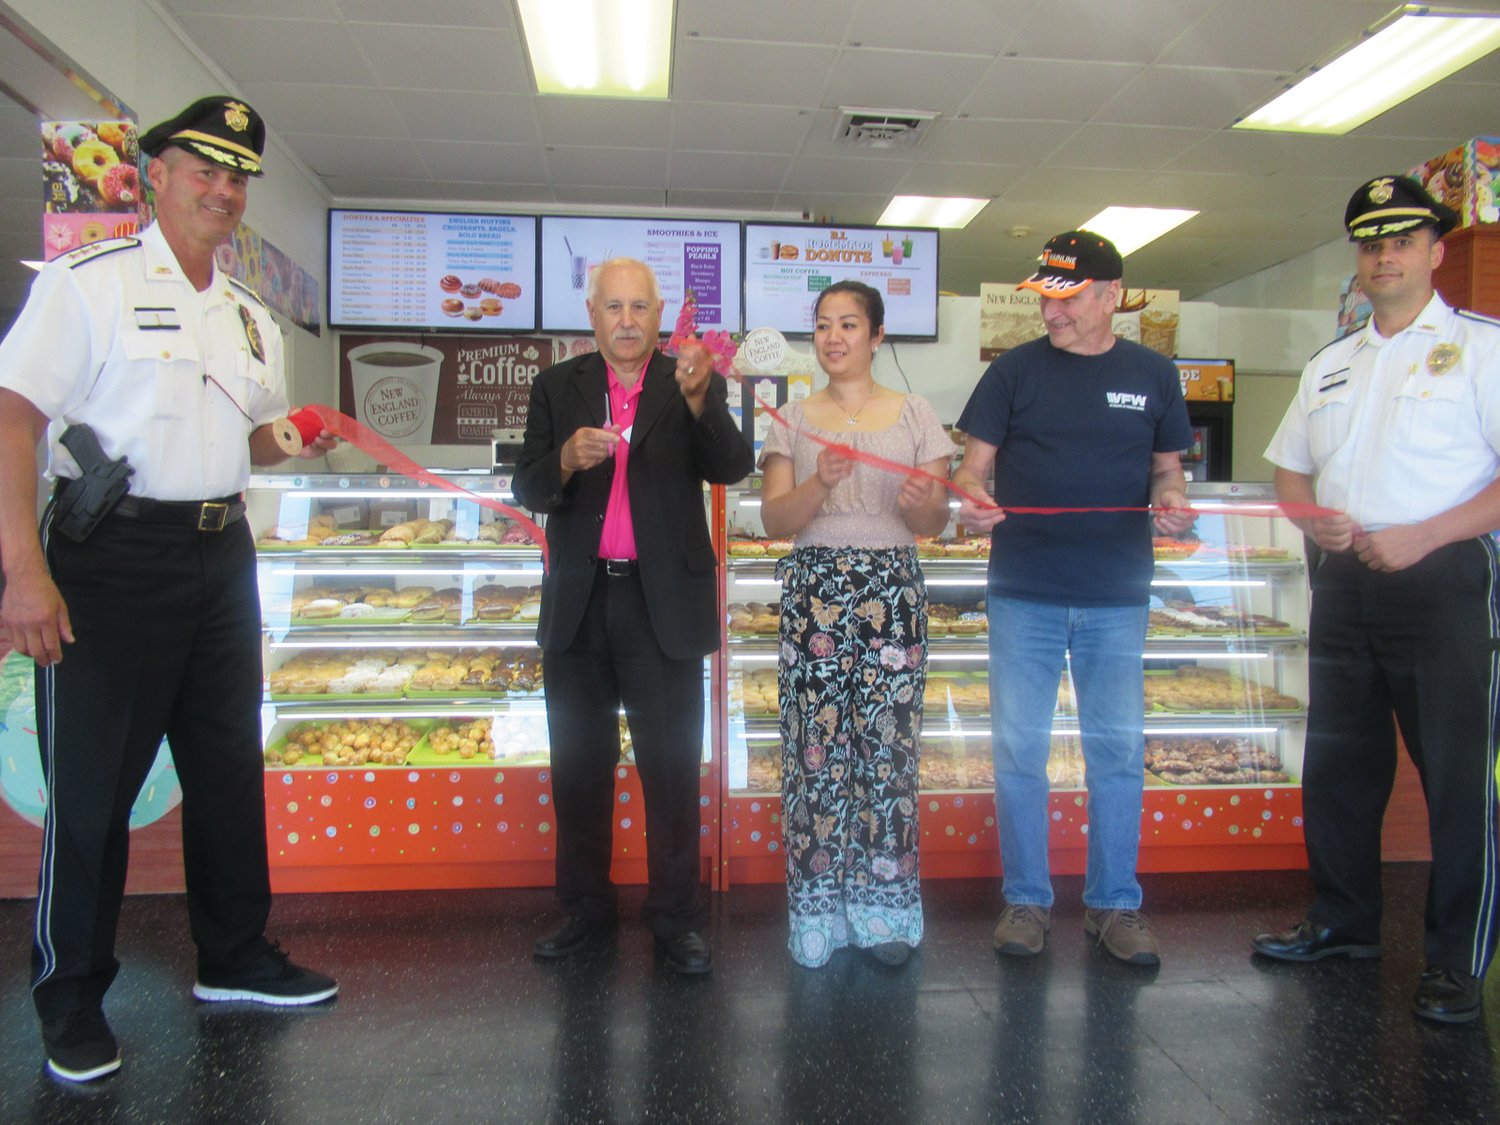 OFFICIAL OPENING: With JPD Chief Joseph P. Razza (left) and Deputy Chief Mark Vieira (right) holding a red ribbon alongside Sophal Cheng and Bob Moulton, Mayor Joseph Polisena performs the ceremonial cutting at last Thursday’s Grand Opening of Rhode Island Homemade Donuts in Johnston.